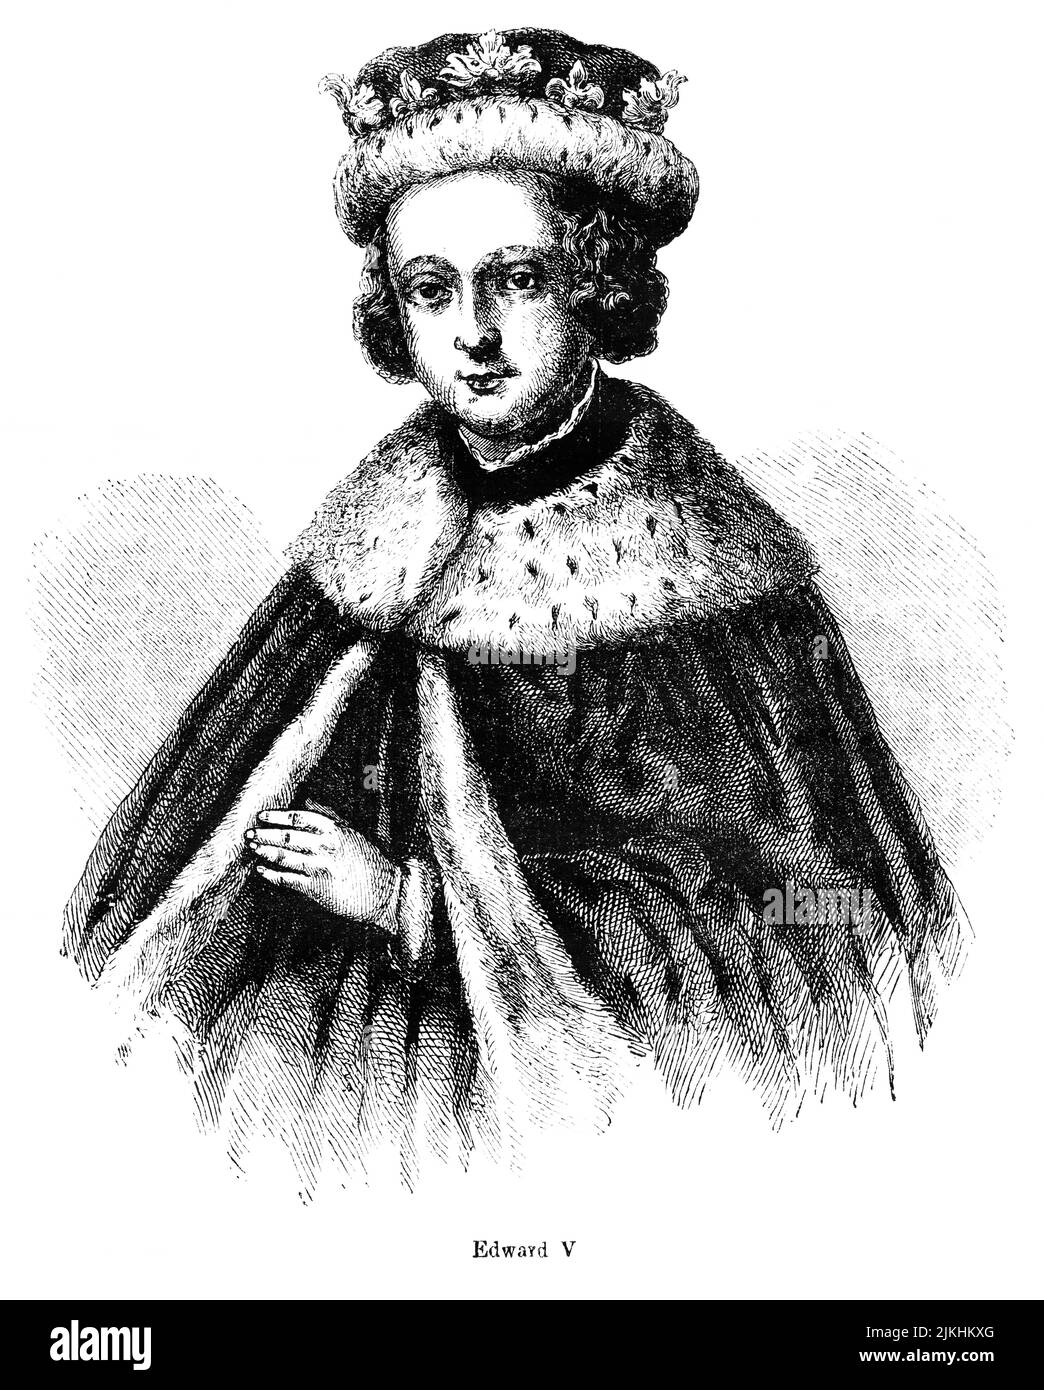 Edward V, Illustration from the Book, 'John Cassel’s Illustrated History of England, Volume II', text by William Howitt, Cassell, Petter, and Galpin, London, 1858 Stock Photo